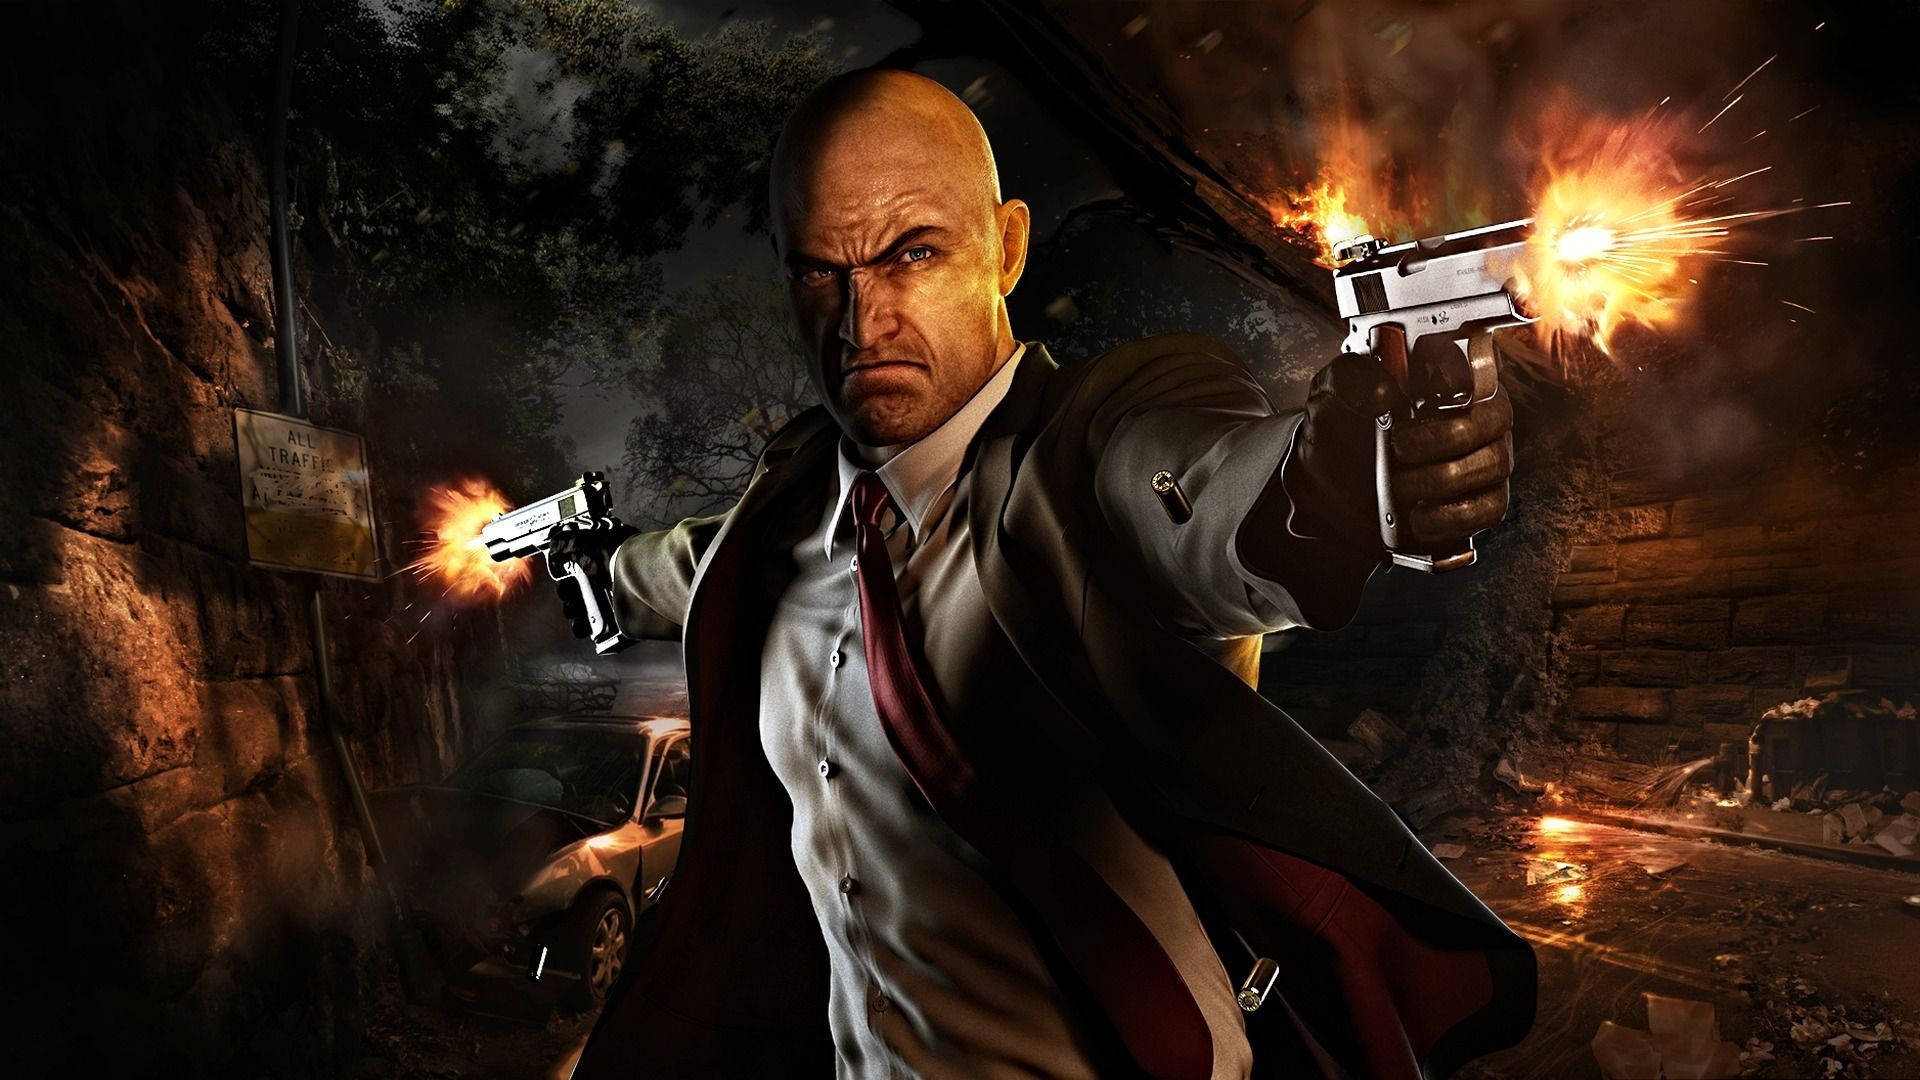 Caption: Agent 47, the Silent Assassin Treks through a Shadowy Cave in Hitman Absolution Wallpaper